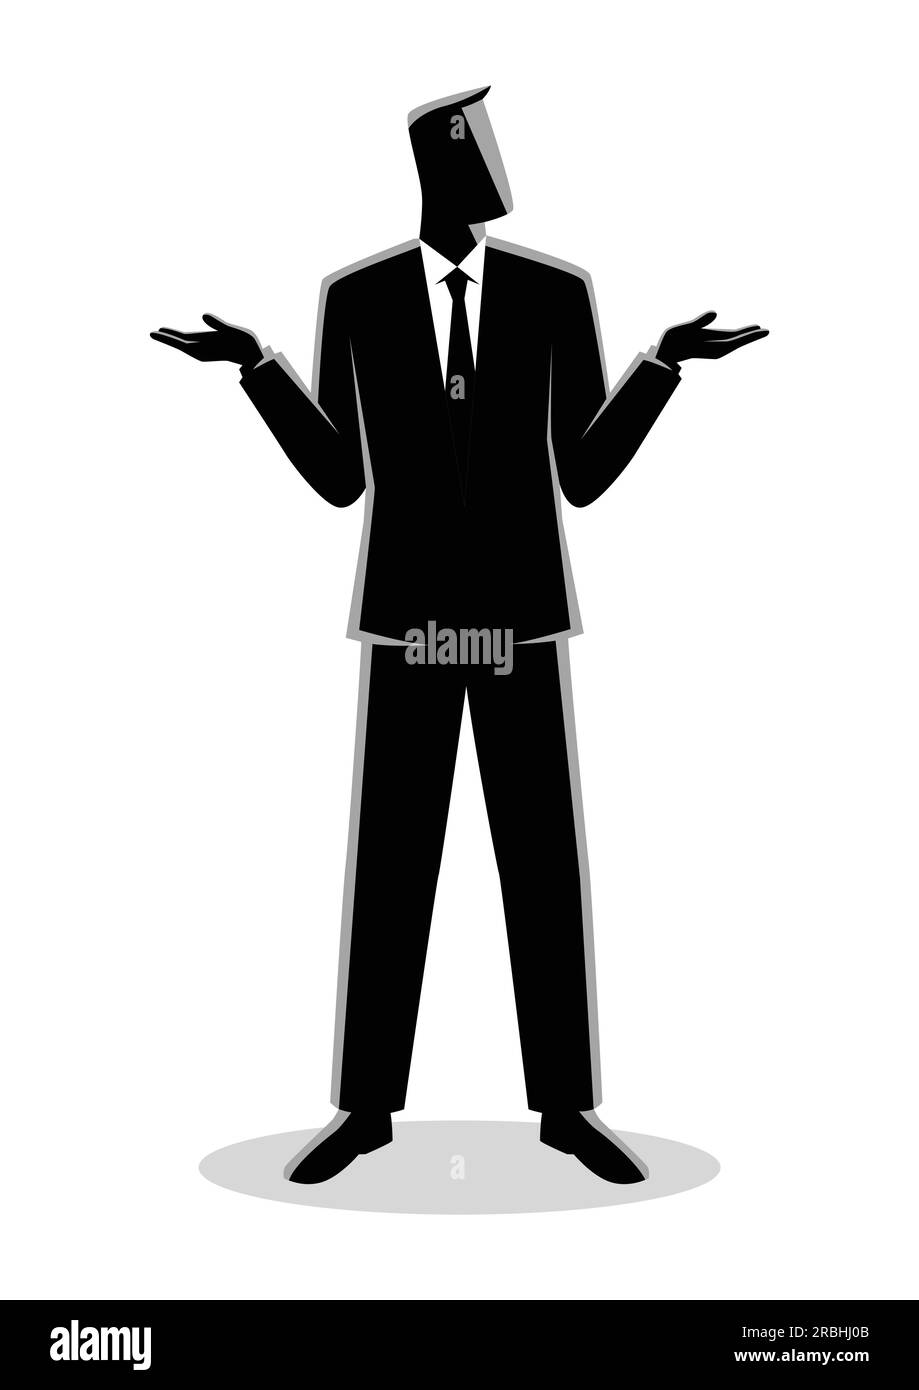 Illustration of a businessman shrugging shoulders gesturing who cares or I don't know body language Stock Vector